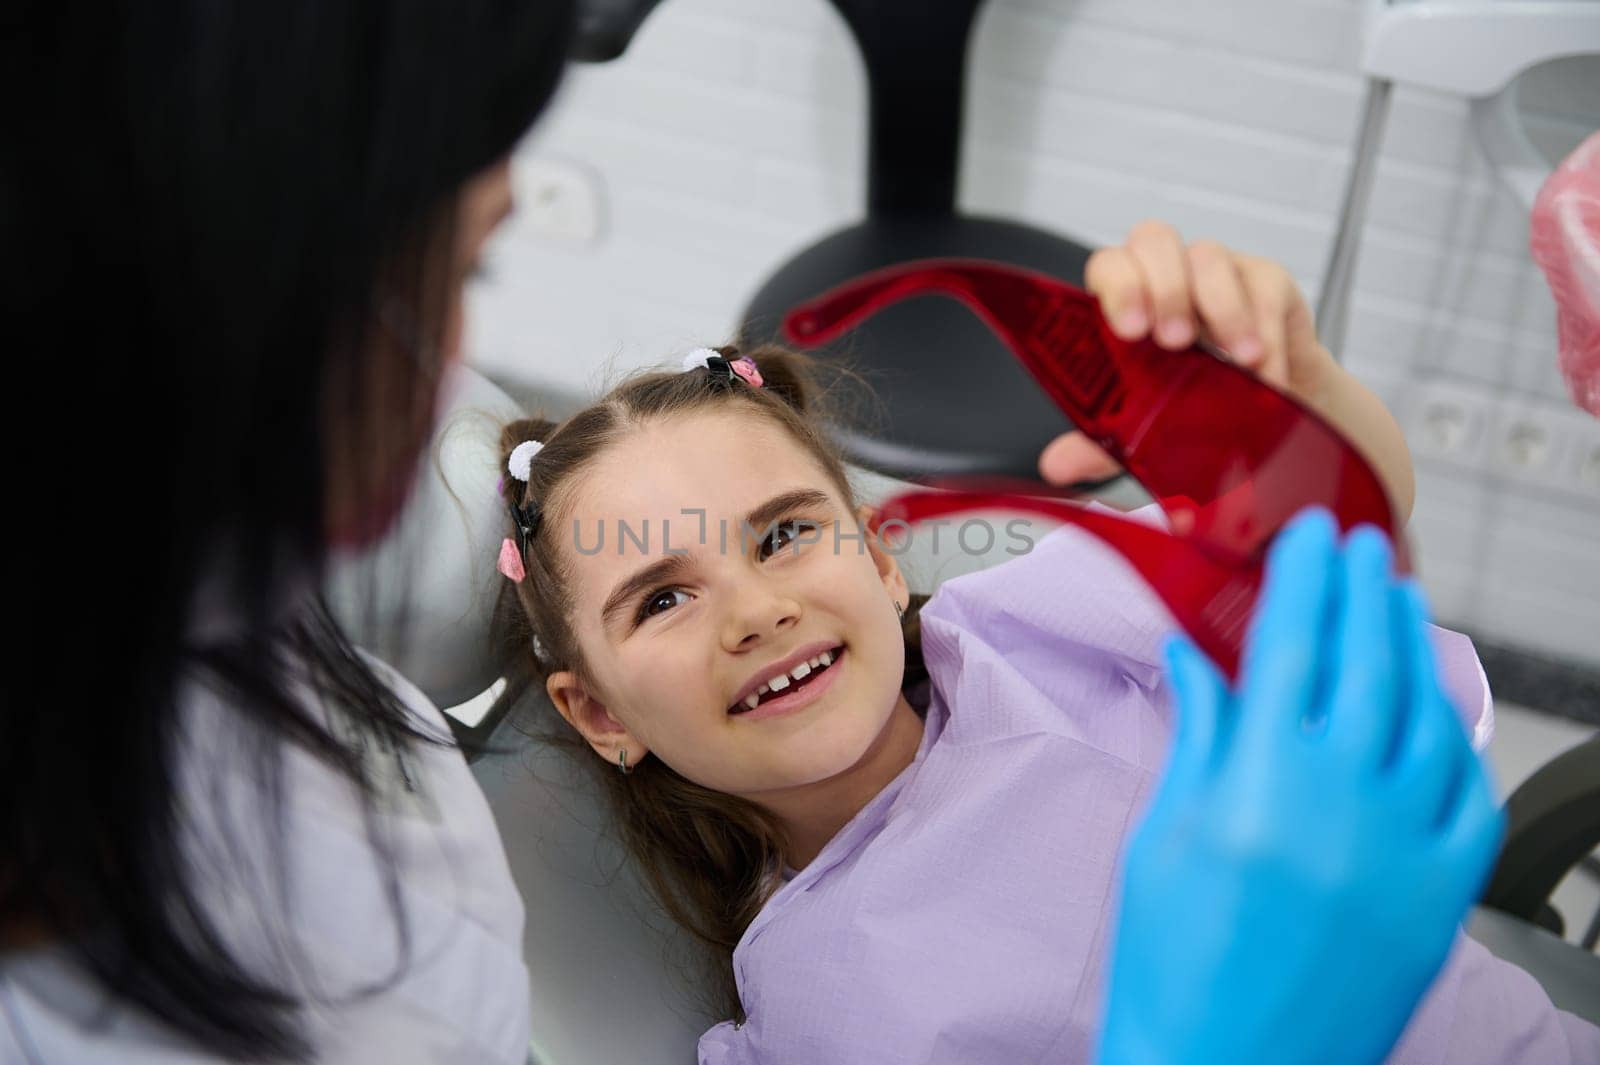 Smiling kid girl visiting dentist, curing tooth, putting braces in modern pediatric dentistry clinic. Female dentist, dental hygienist treating caries to little child patient. Oral health and hygiene